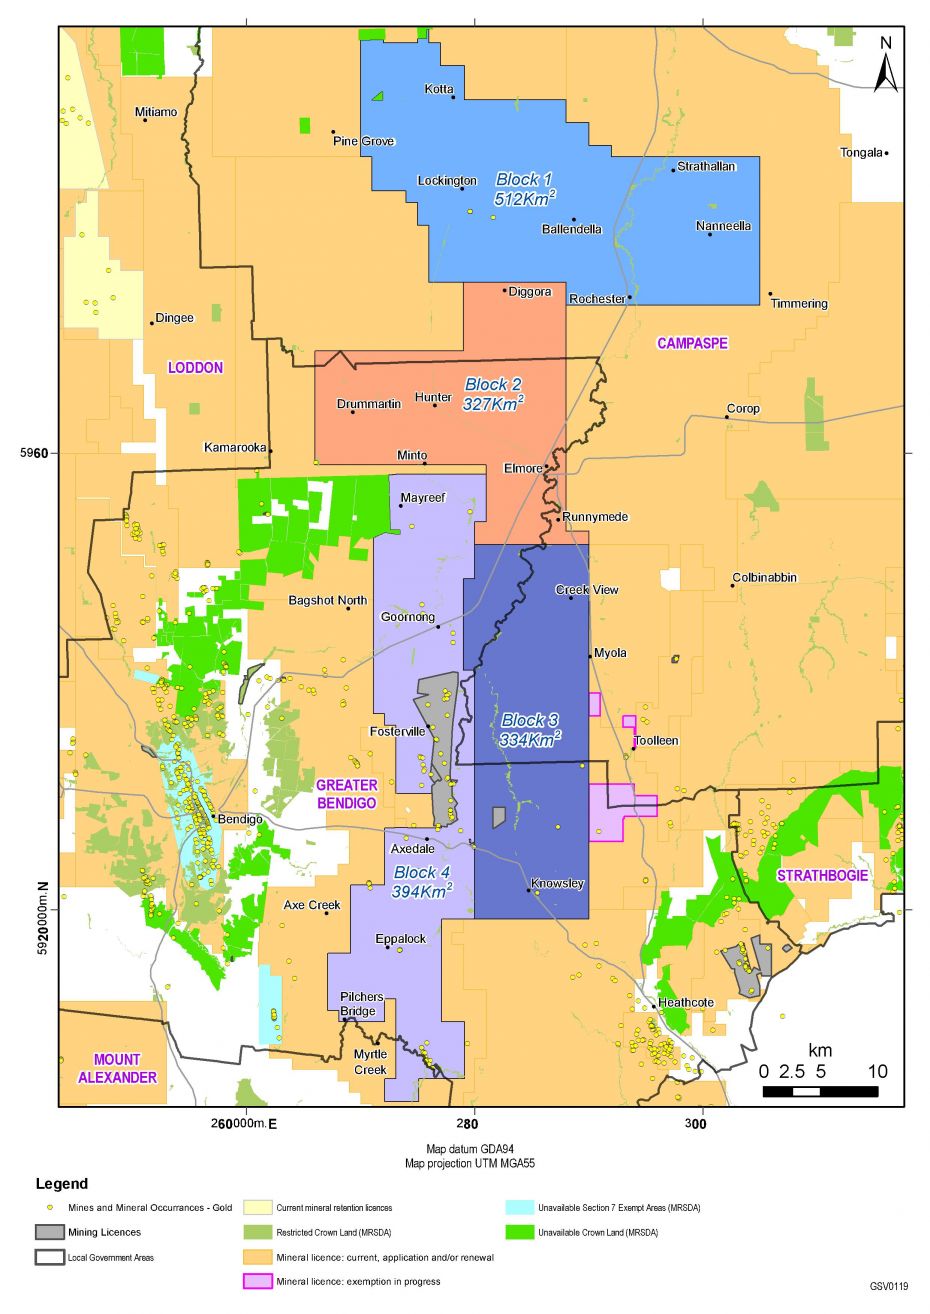 Map North Central Victoria showing the four blocks offered for minerals exploration; block 1 at the top of the North Central Victoria is 512km2, Block 2 in the middle of North Central Victoria is 327 km2, Block 3 is 334km2 and Block 4 which is long and thin, stretches from mid to North Central Victoria to the bottom near Myrtle Creek is 394km2.